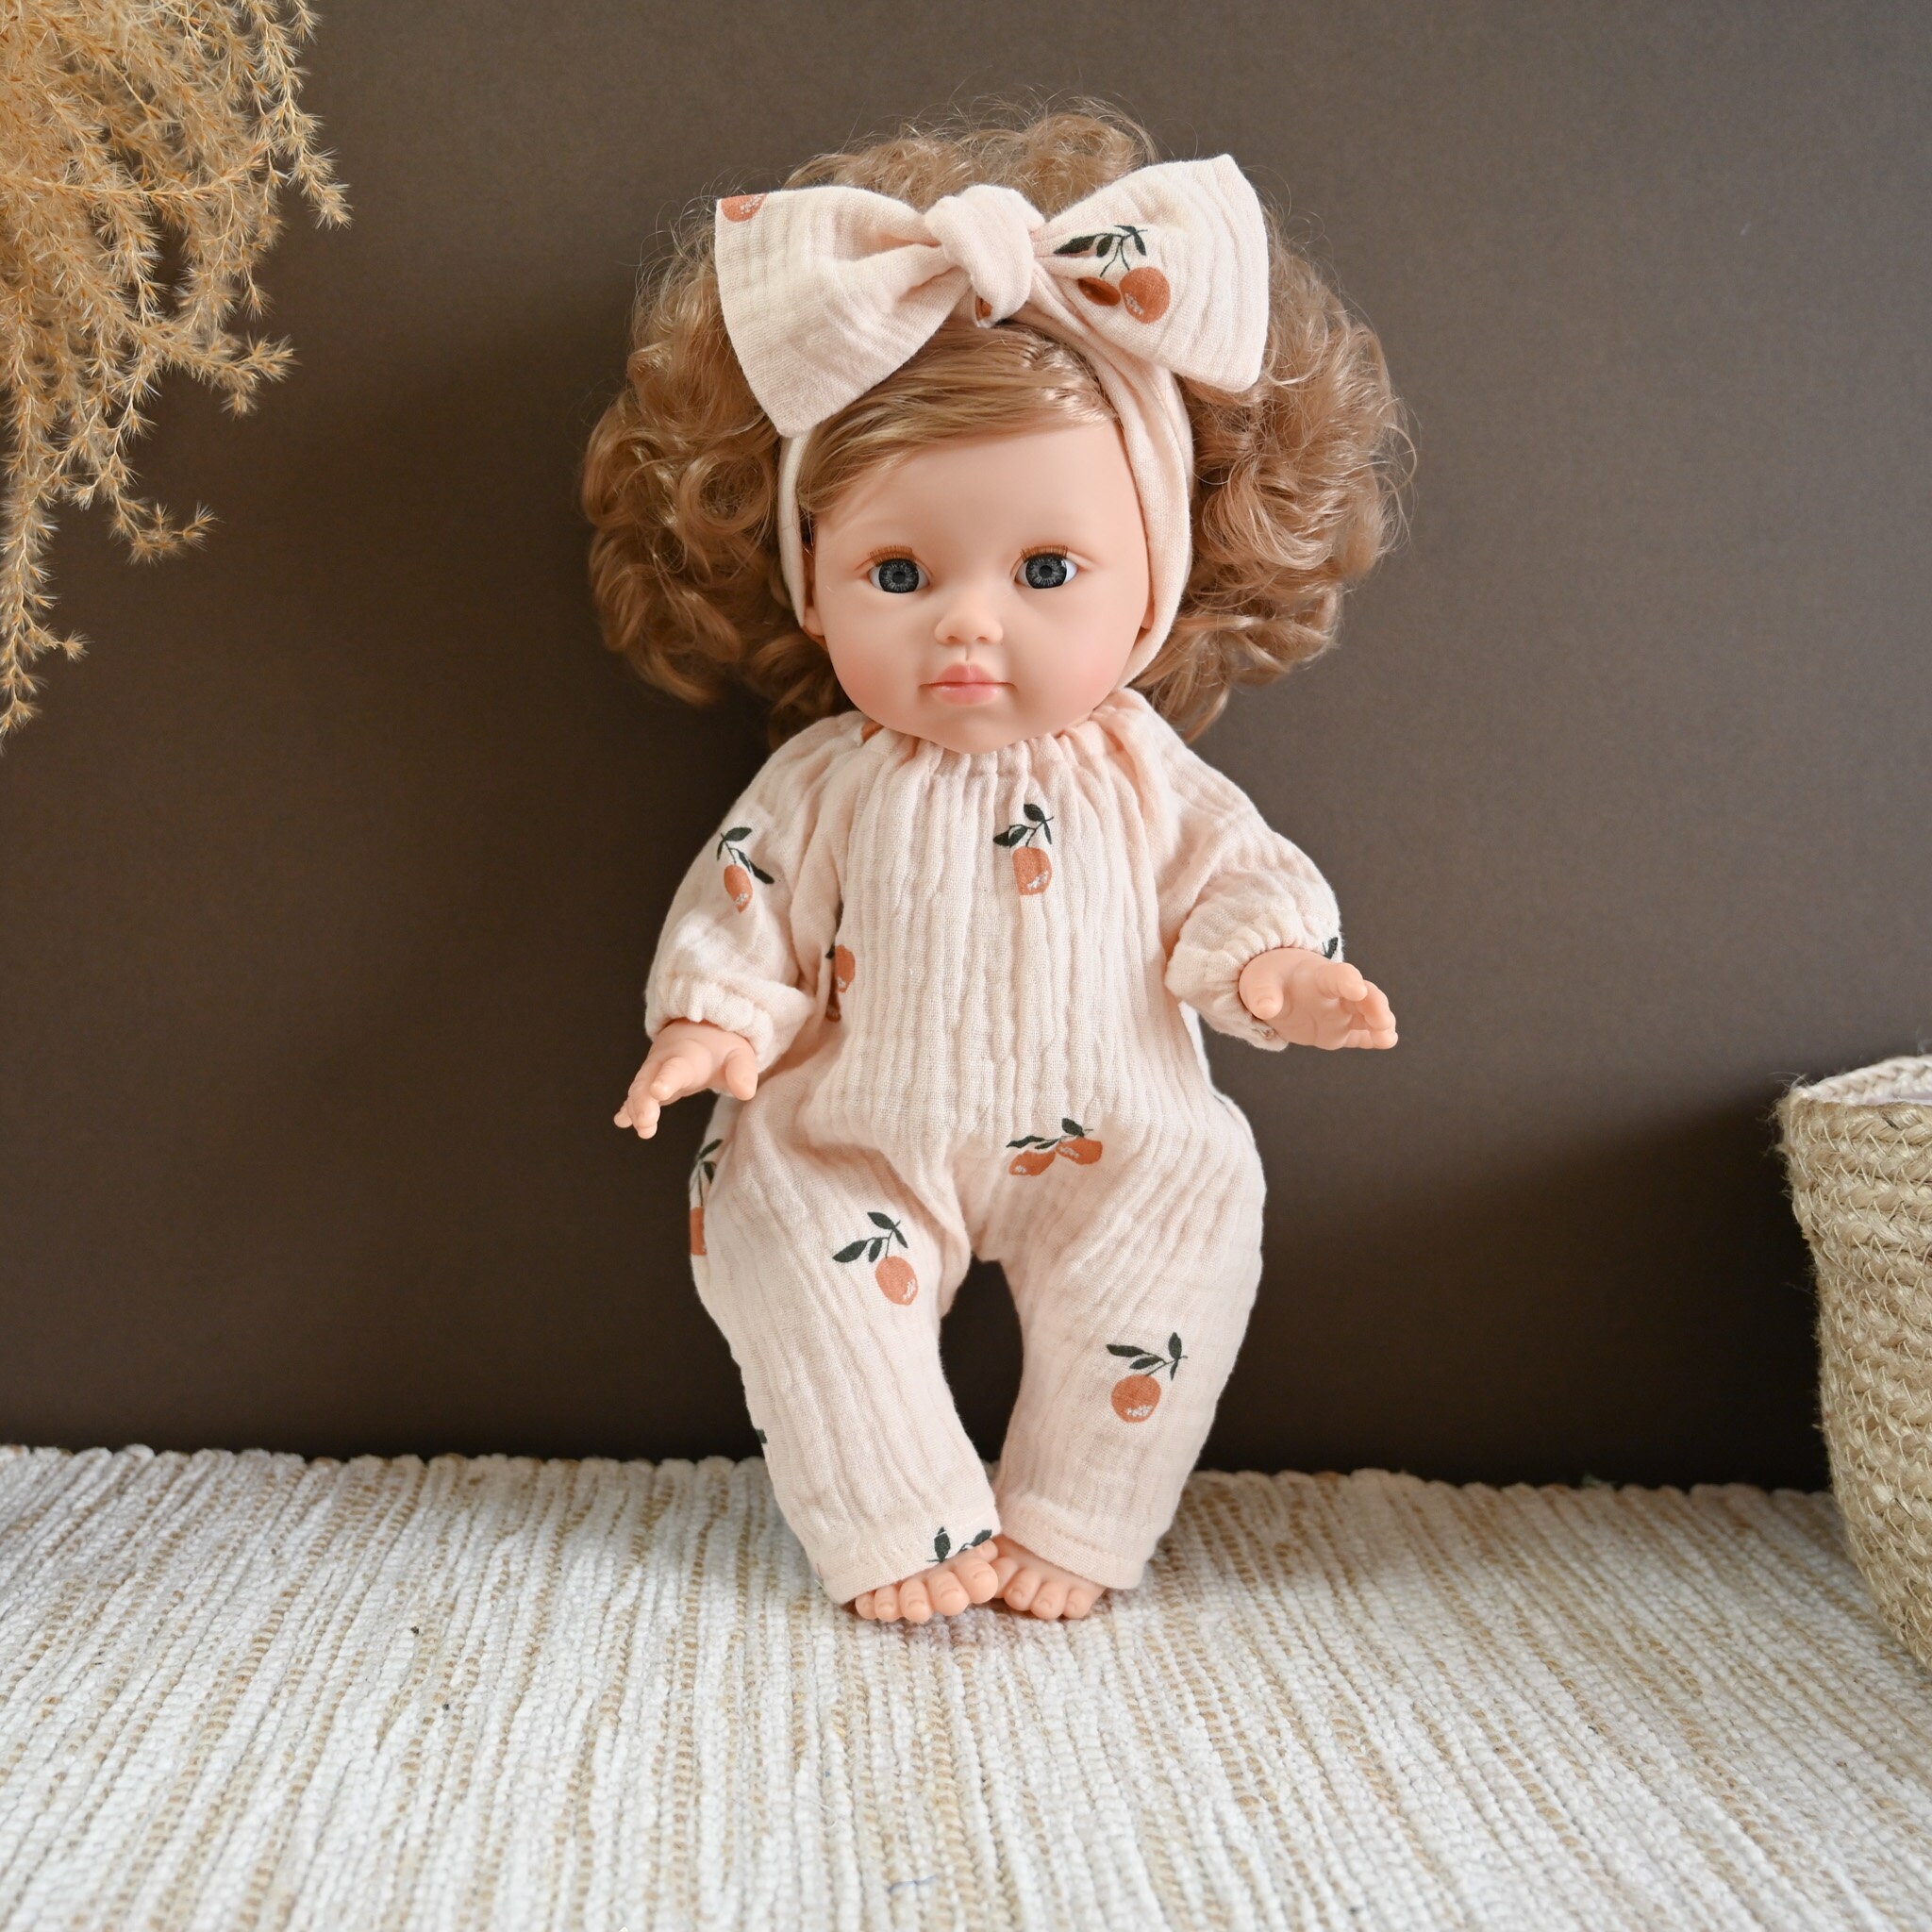 WONDOLL 12 inch Baby Doll-Clothes and Accessories - 10 Sets Doll Clothes  for 10-12 Inch Dolls, Baby Doll Clothes Dress Outfits Accessories Christmas